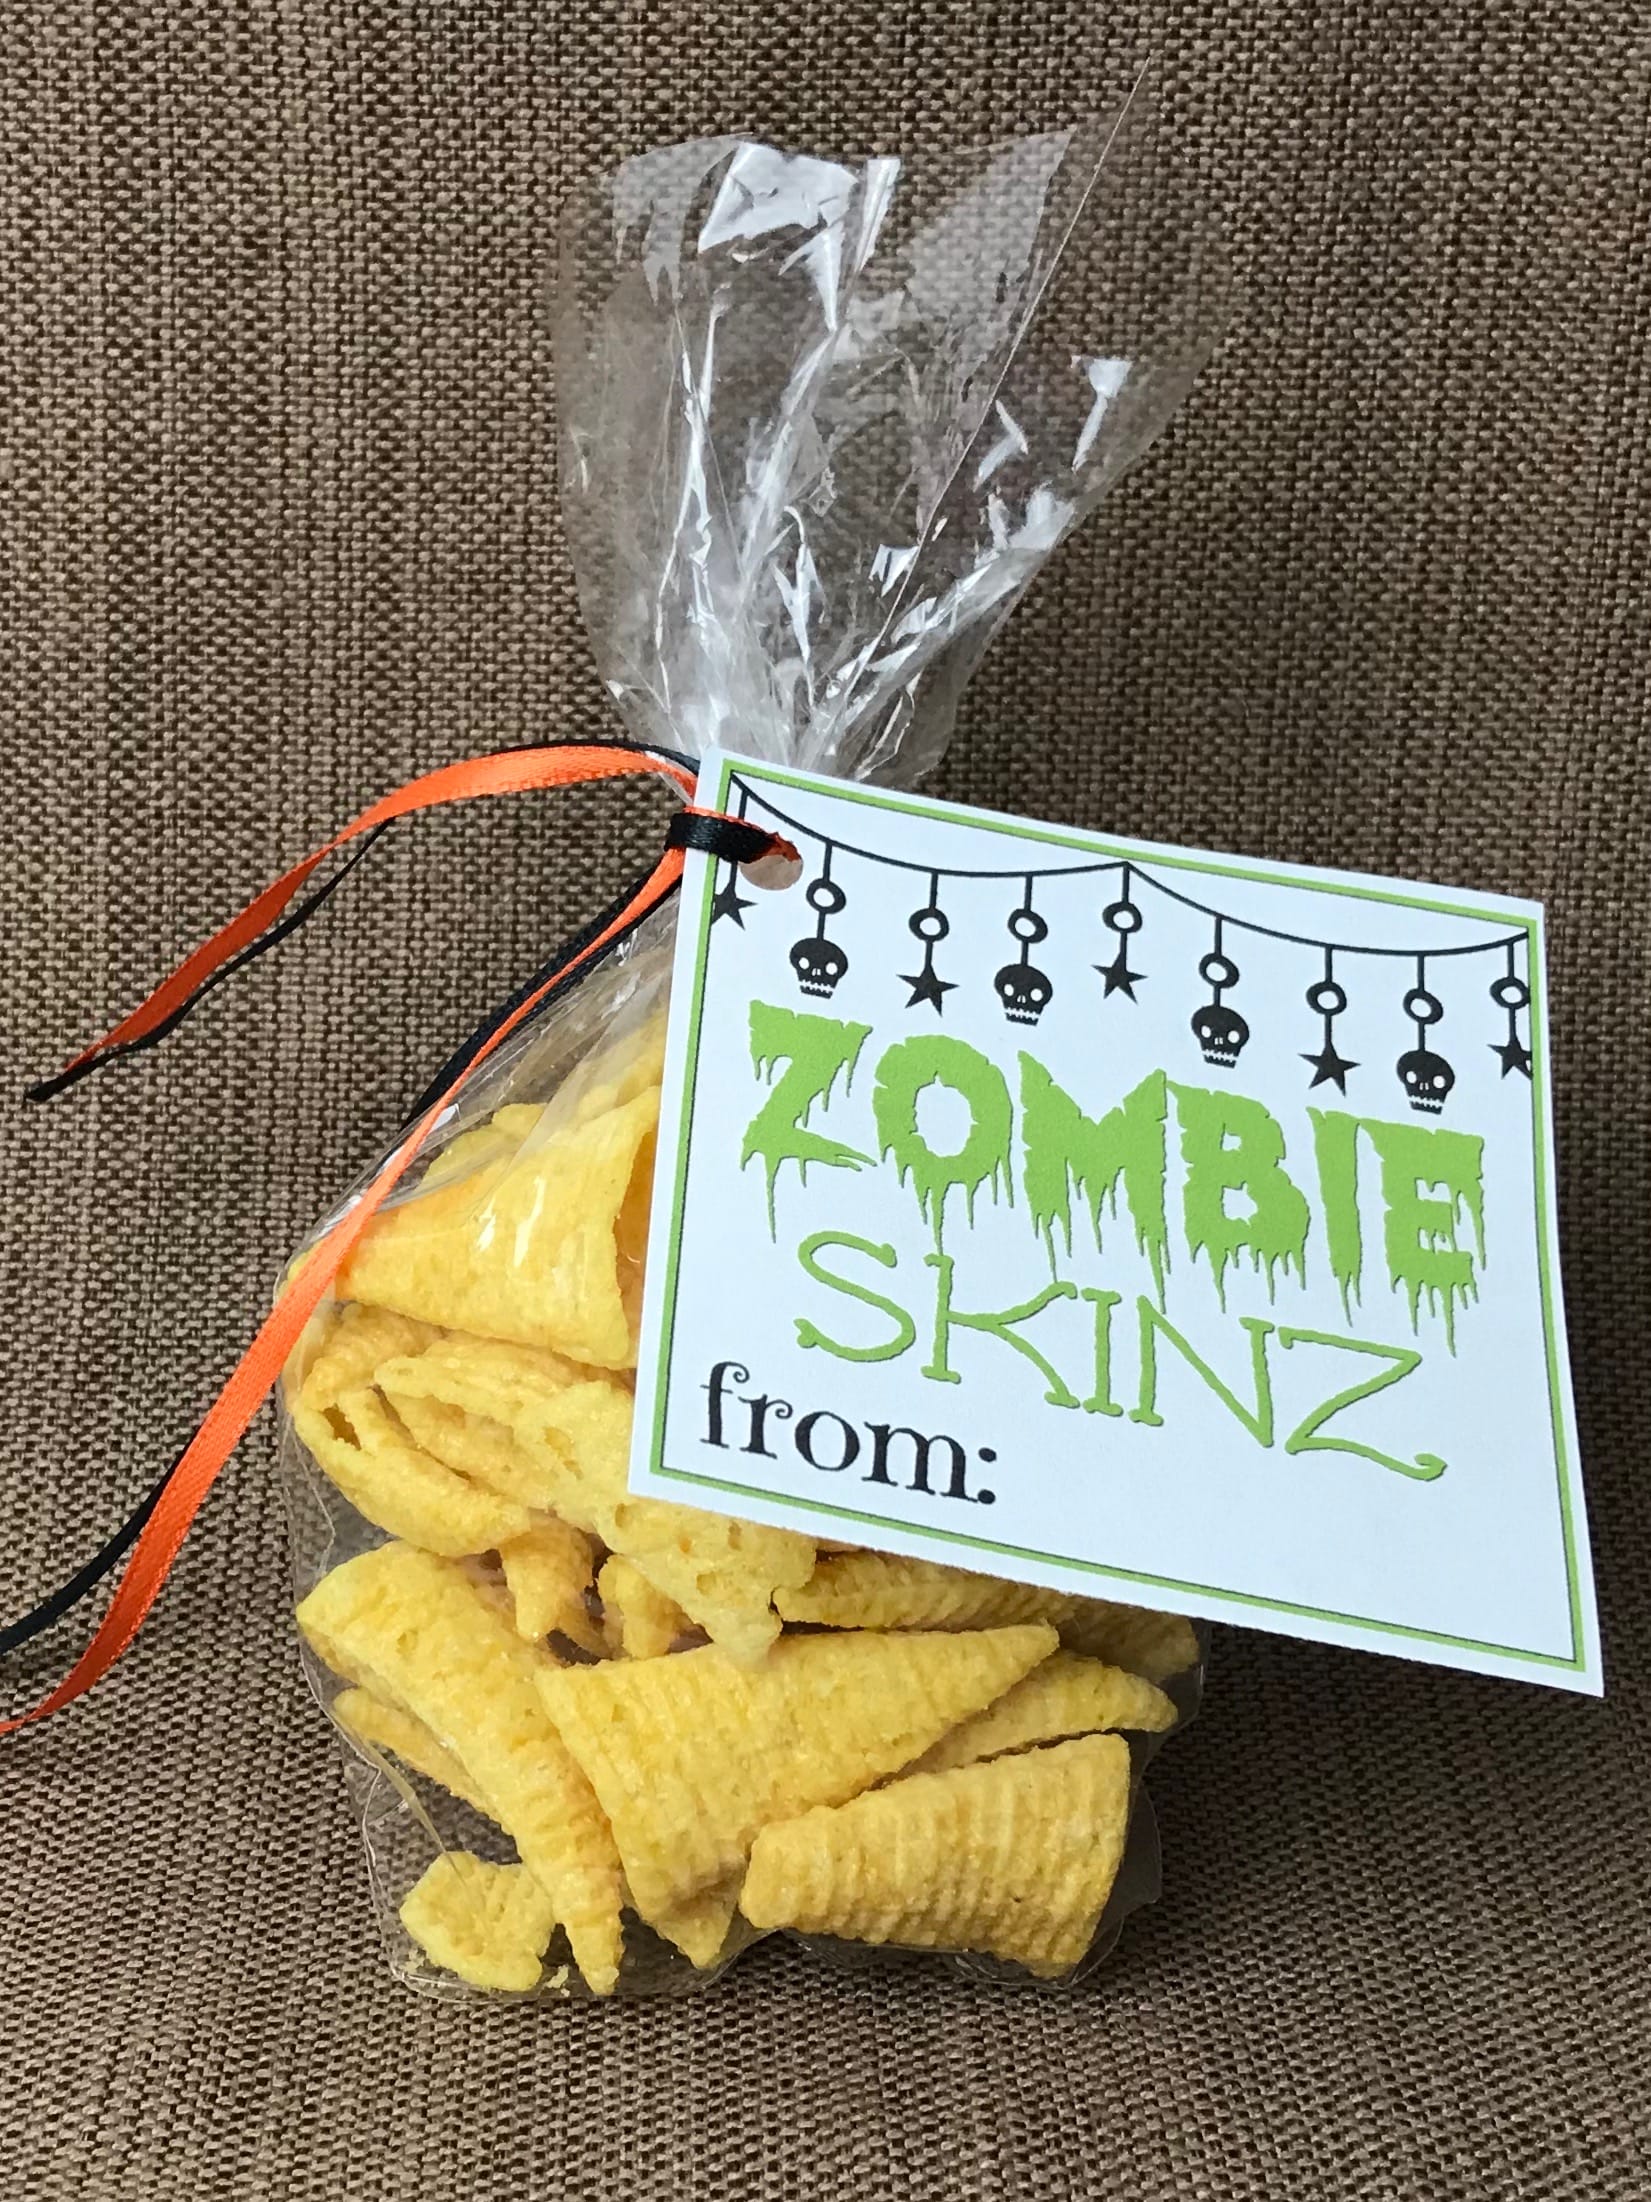 Halloween goodie bags are a great idea for a Halloween party for kids. Whether it is at school or with an organization, kids get excited about goodie bags. Use these Halloween printables for Halloween gift giving.